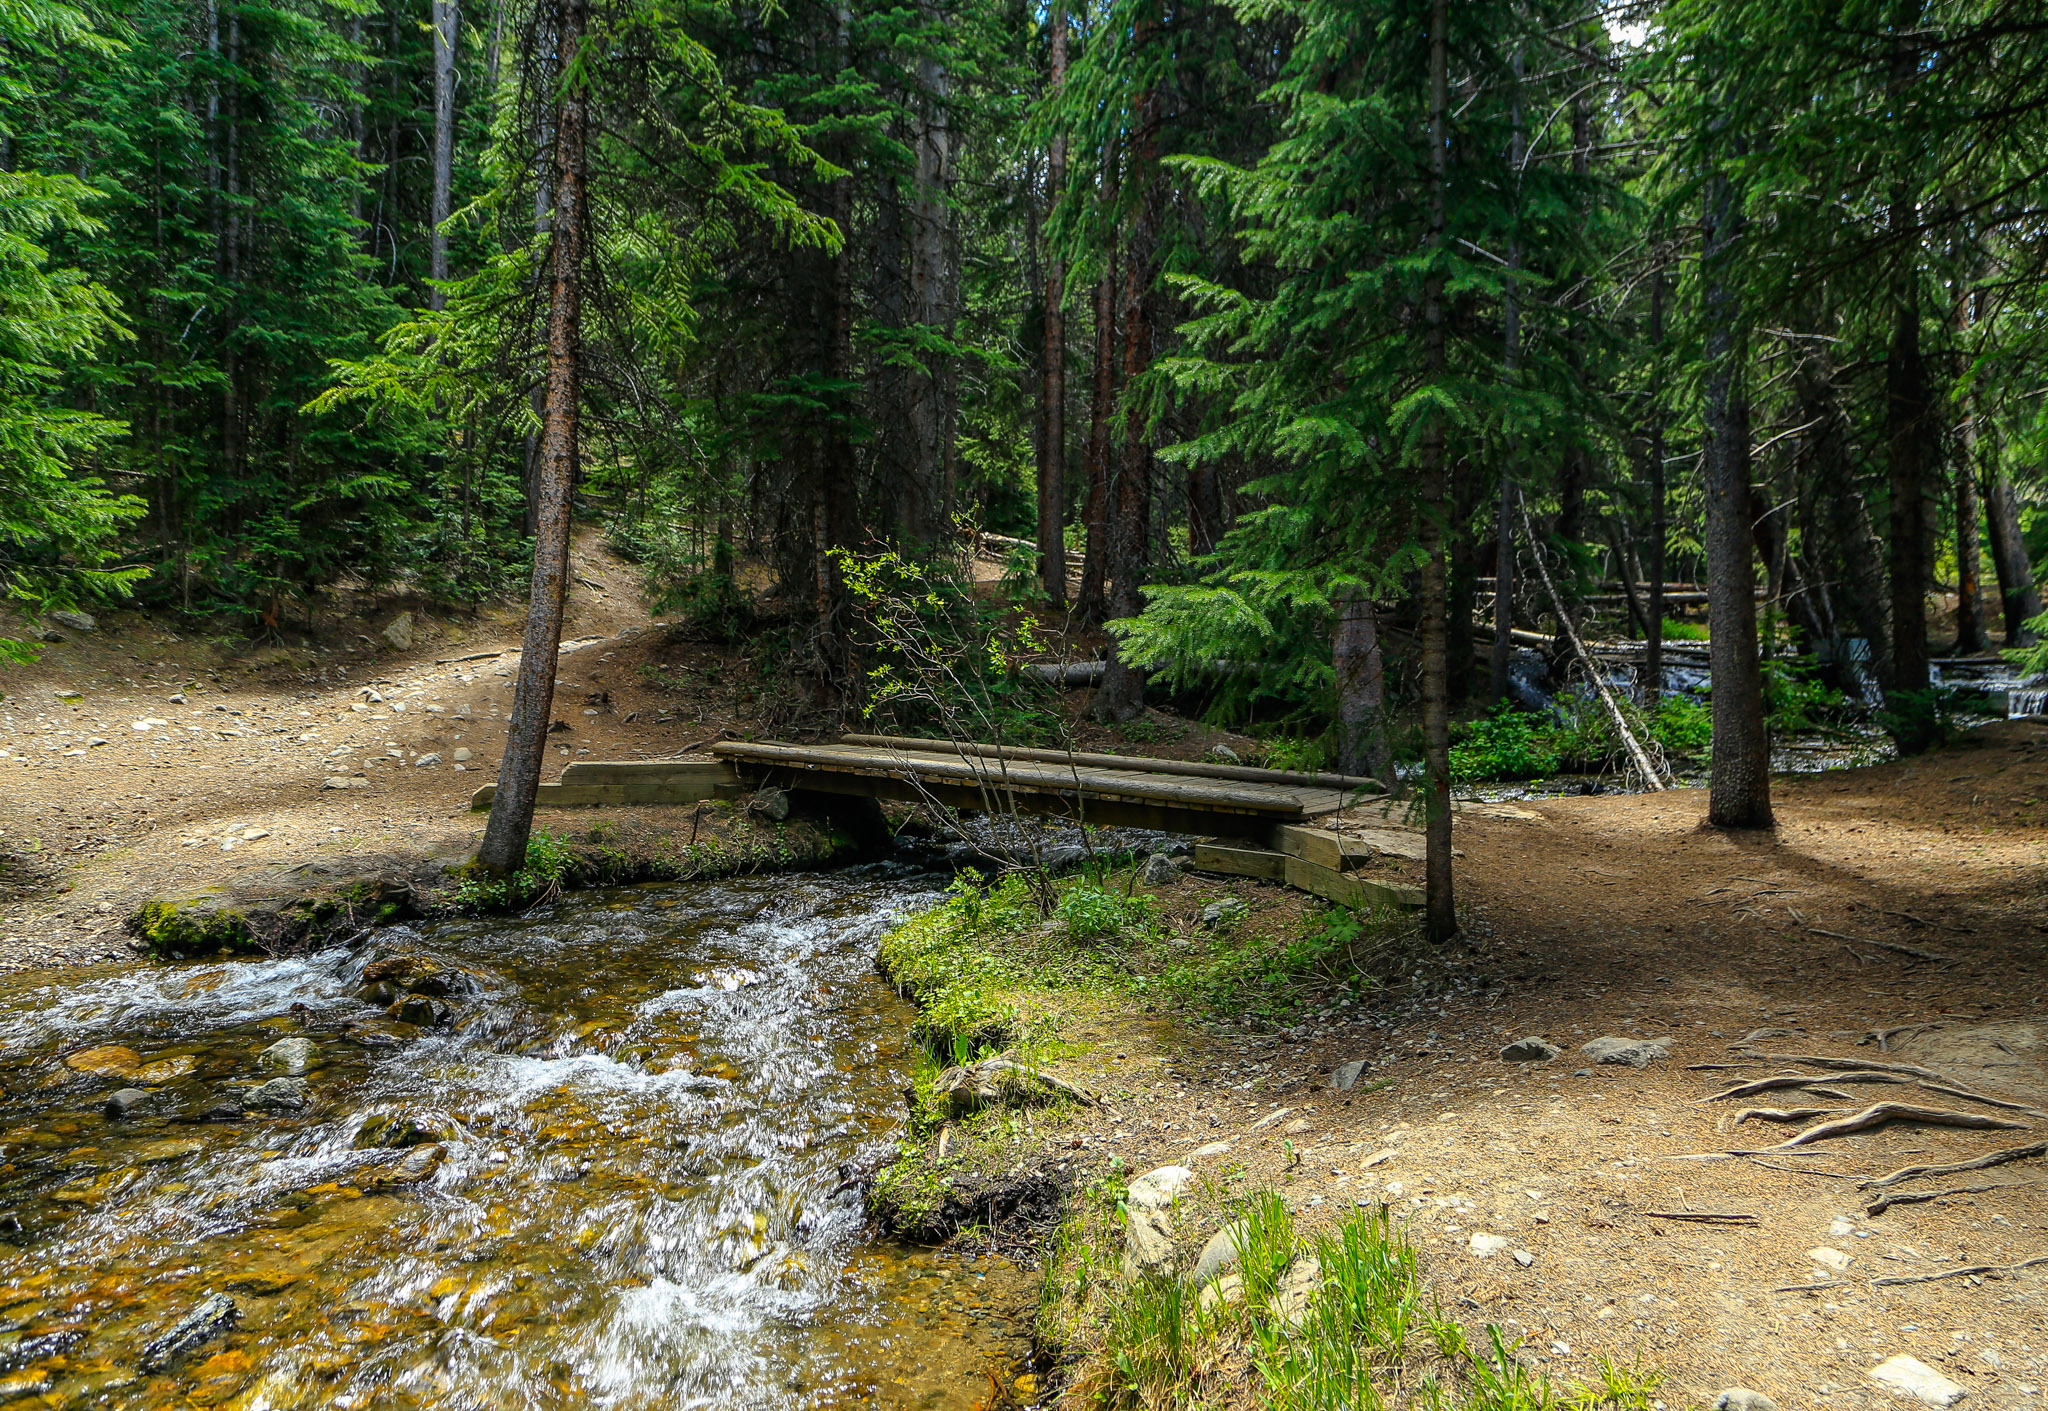 The Burro Trail follows along a creek as it makes its way into the forest.